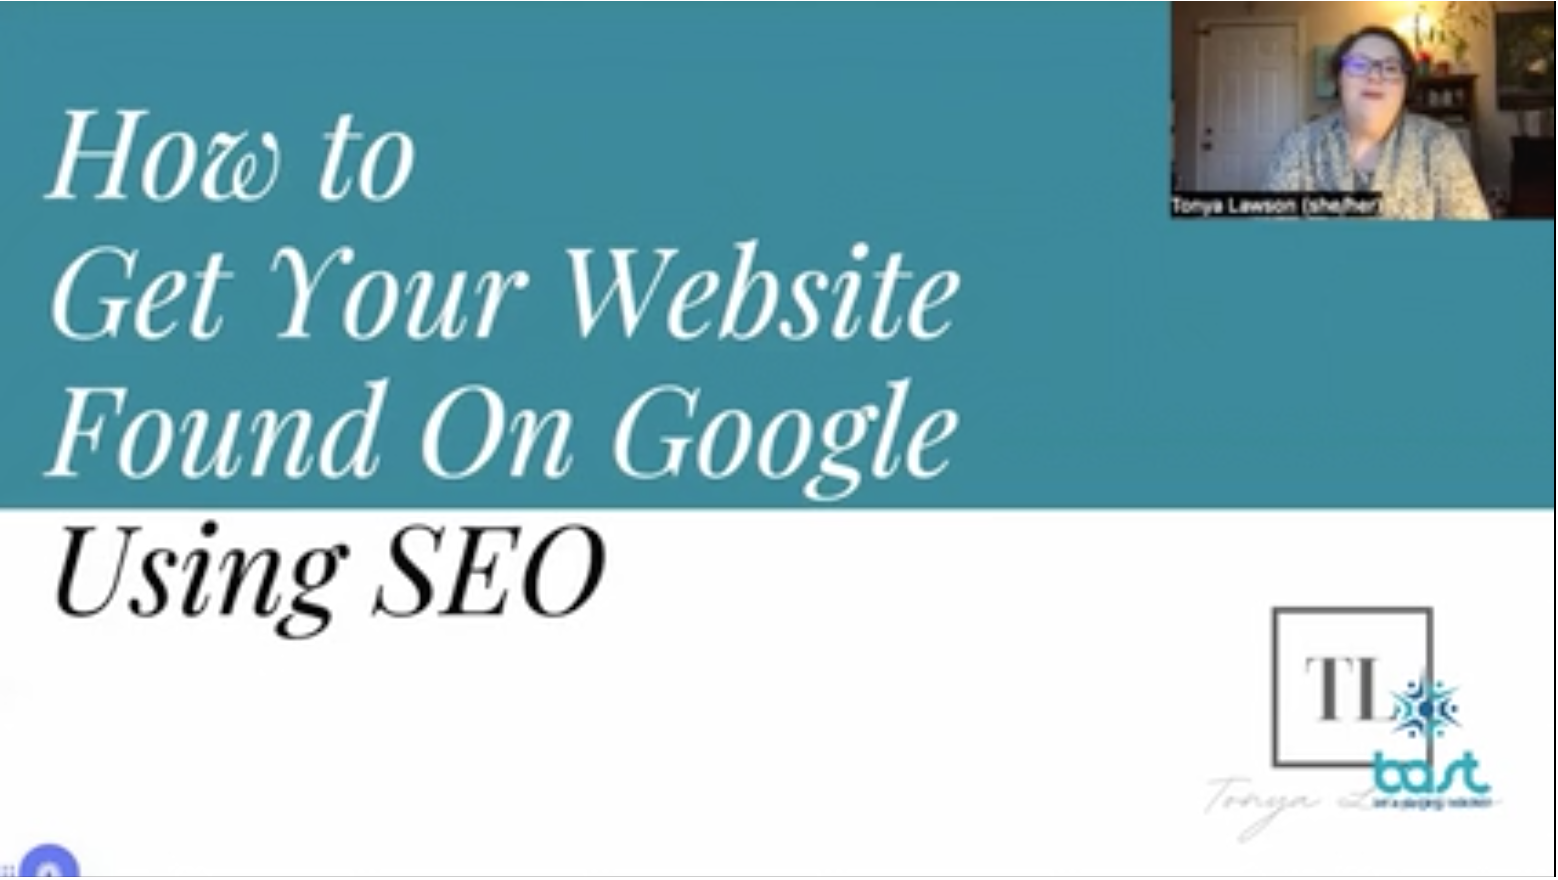 How to get your website found on Google using SEO